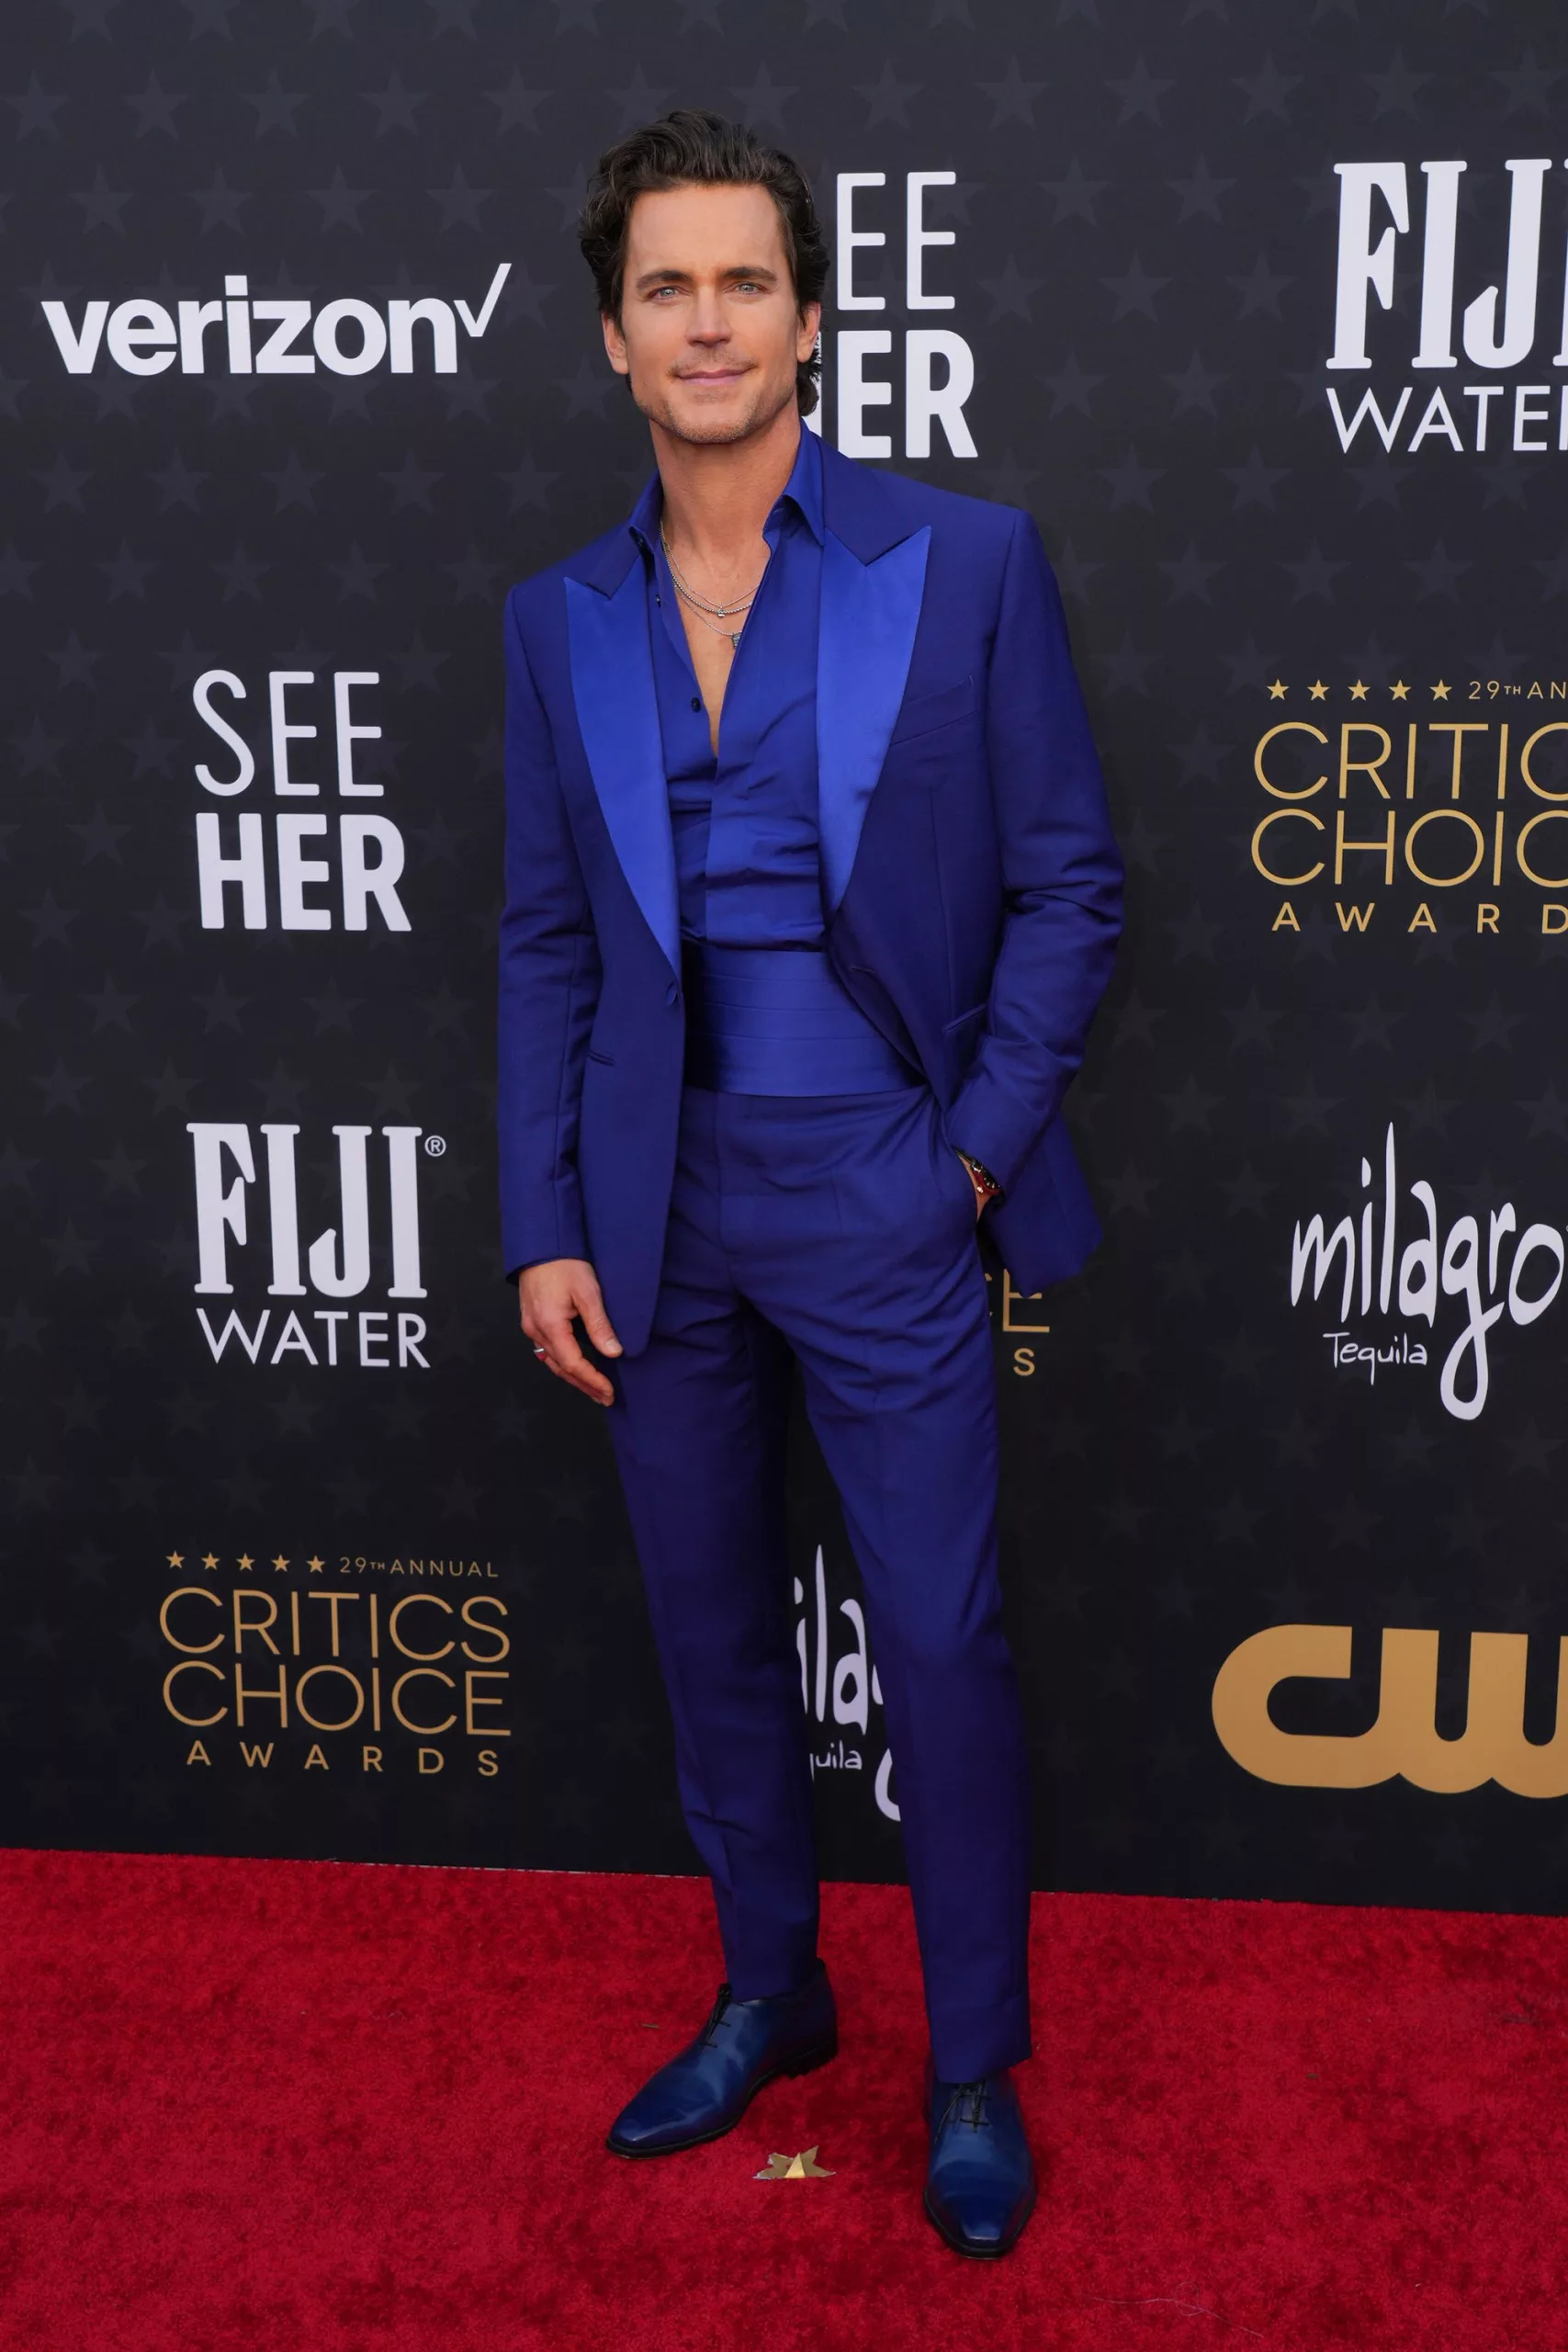 Matt Bomer, nominated in the best actor category for “Fellow Travelers,” brought contrast to the red carpet with a sleek bright blue Berluti suit and matching Oxford shoes.